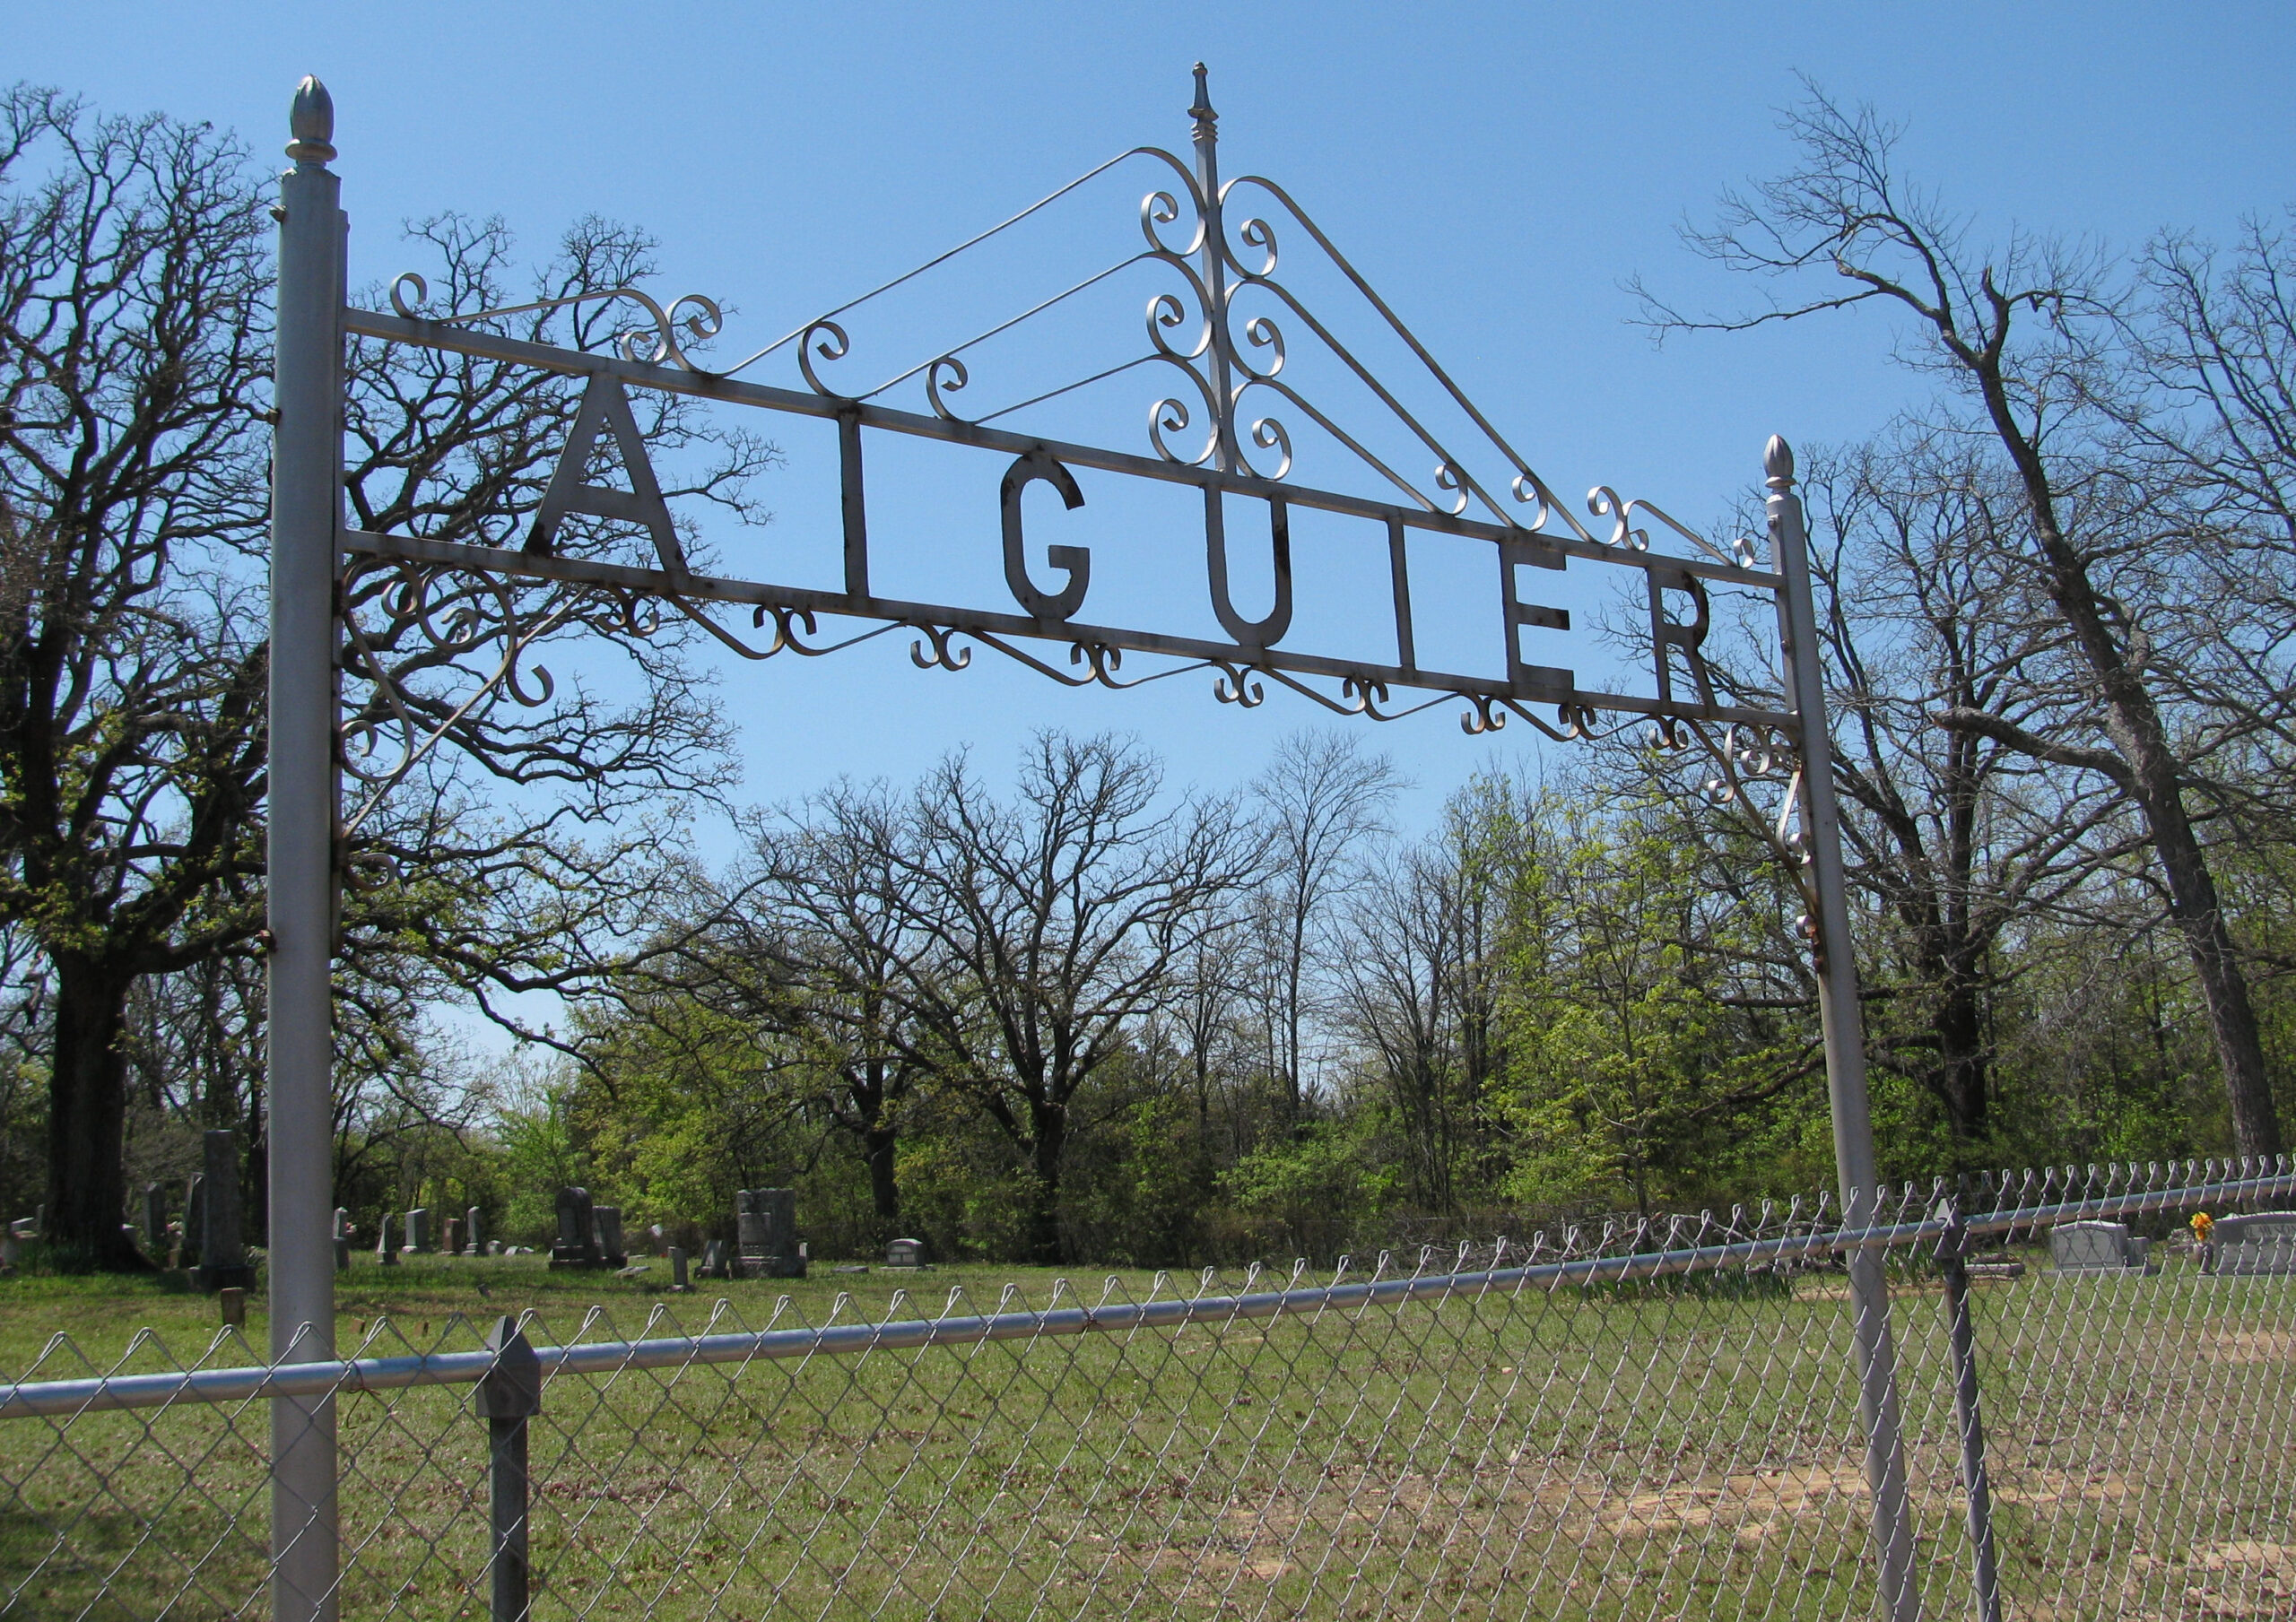 Aiguier Cemetery Association Meeting Planned for June 6th